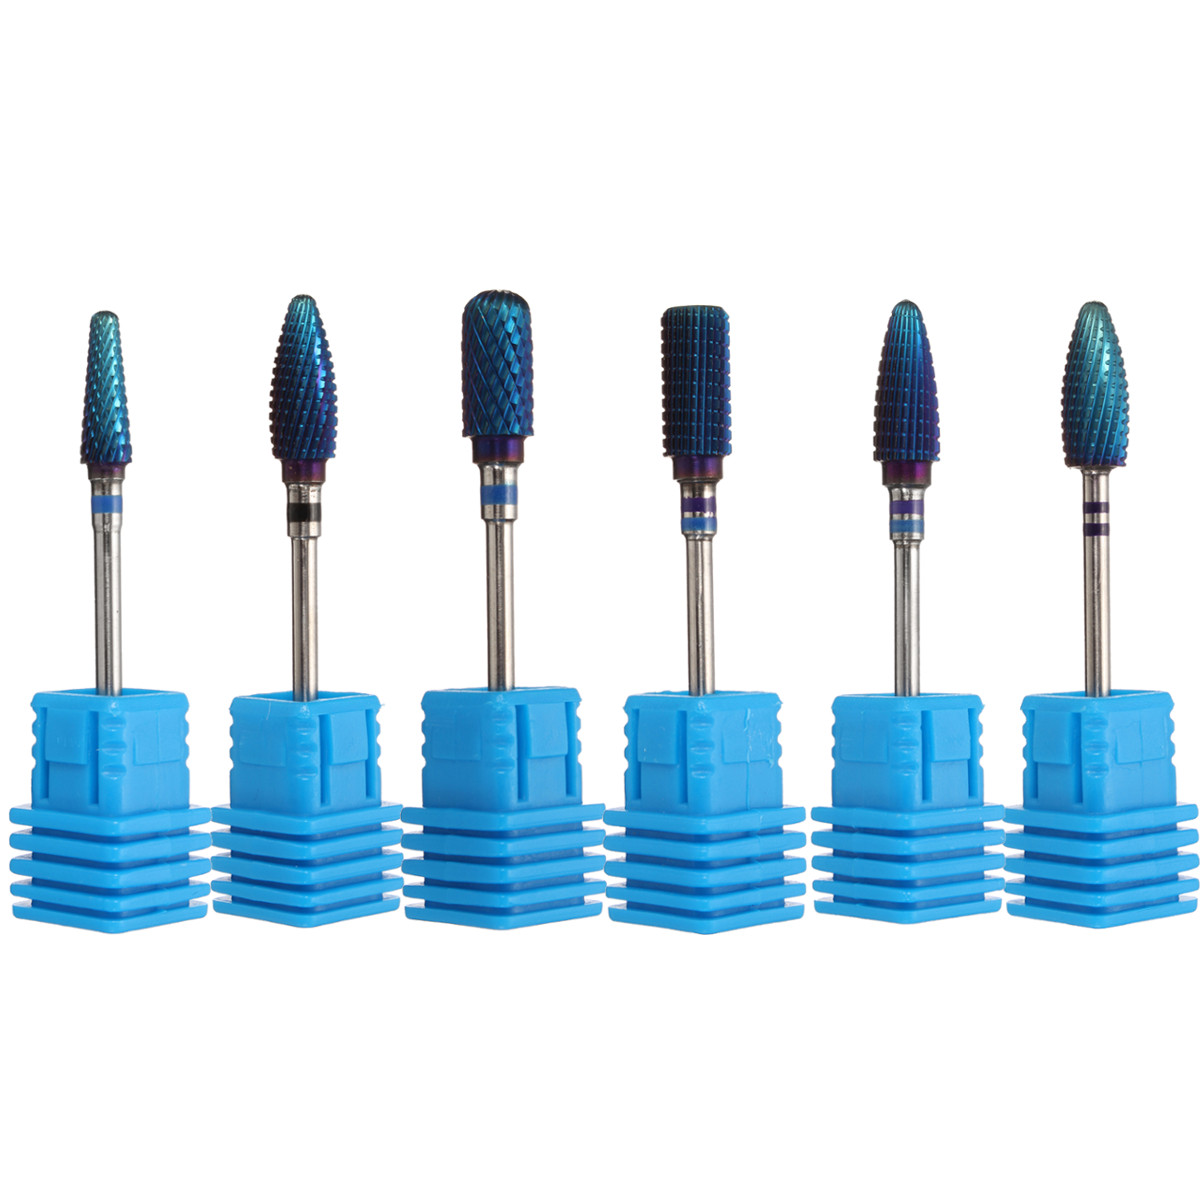 Pro-Electric-Blue-Cylinder-Coated-Carbide-File-Drill-Bit-Nail-Art-Manicure-Pedicure-Kit-1126688